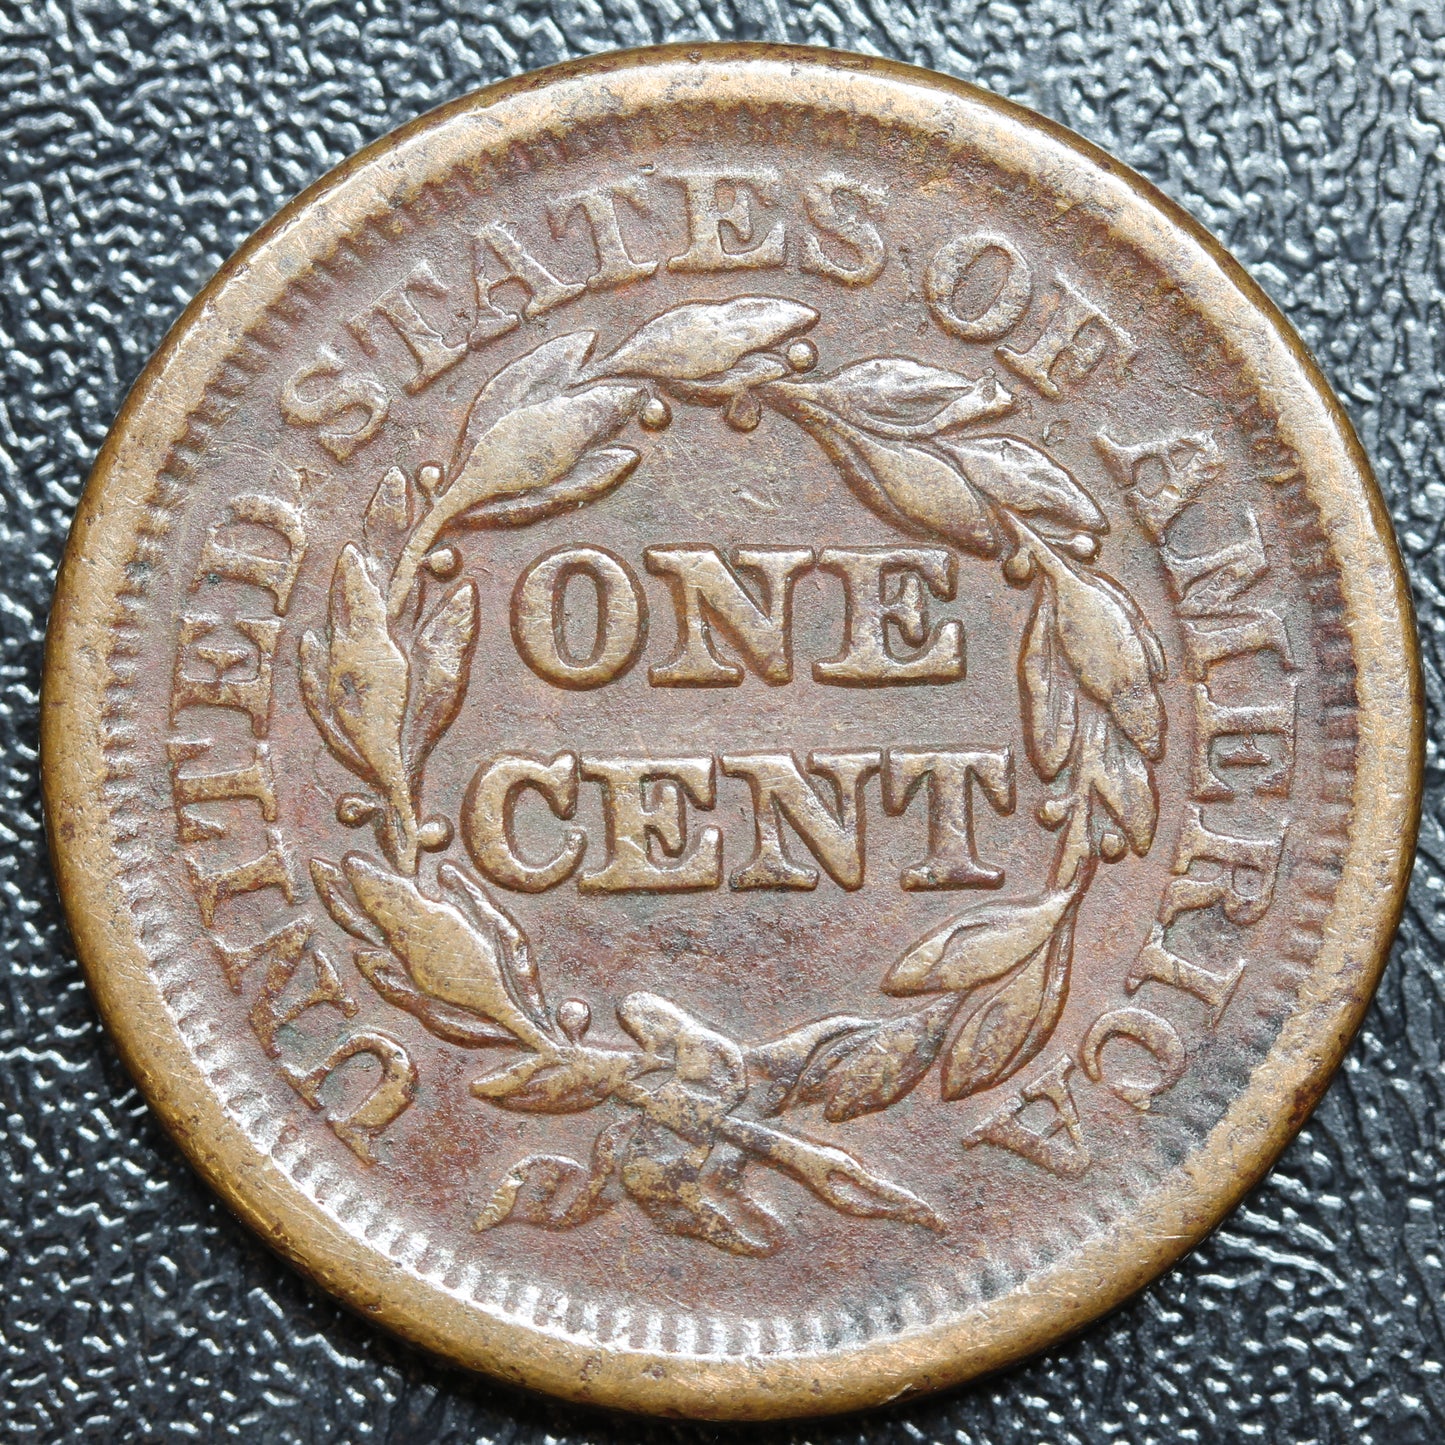 1851 Braided Hair US Large Cent 1C Penny